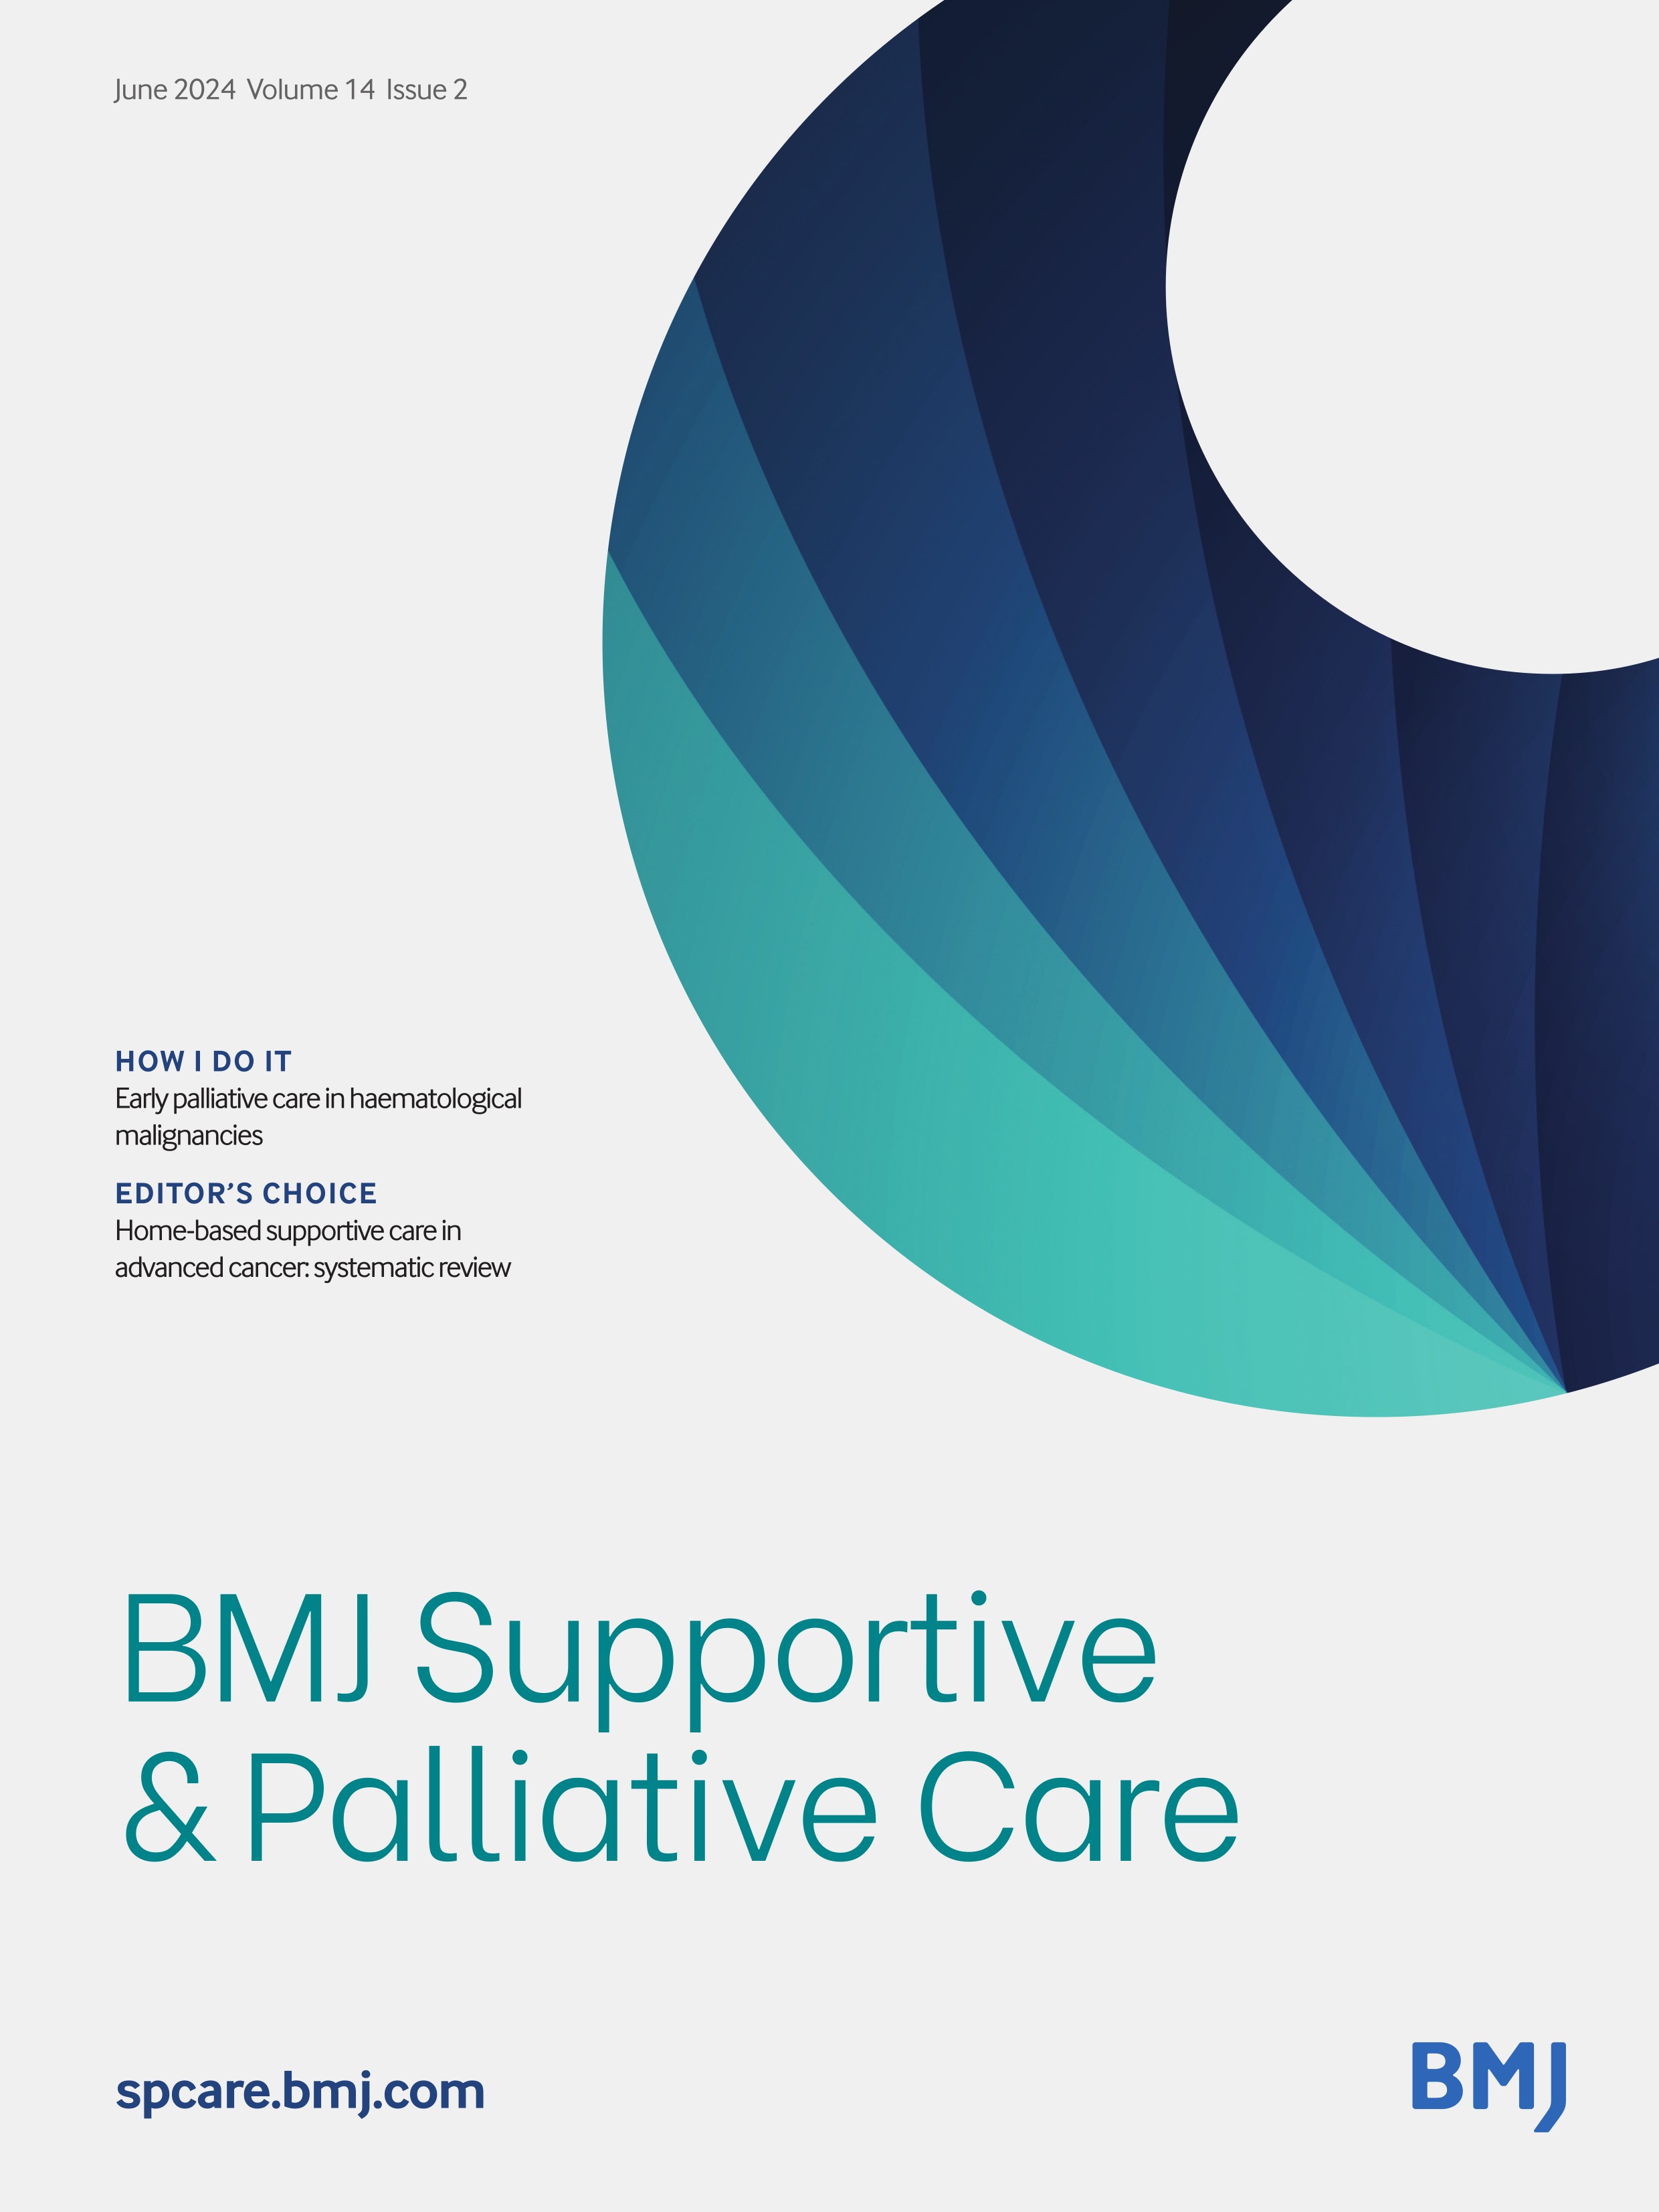 Gender equality in palliative medicine editorial boards, authorships and national societies